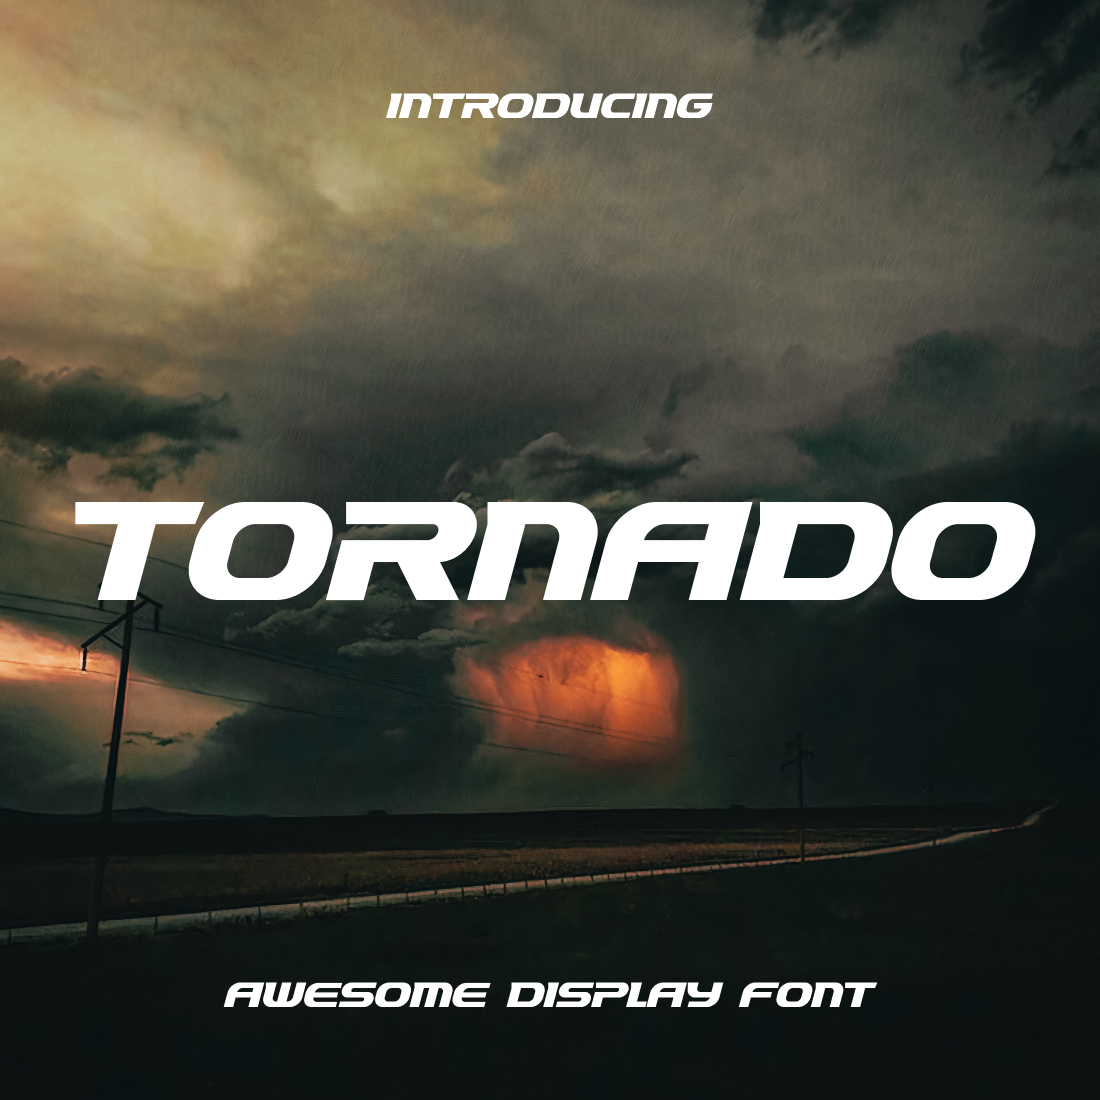 Interesting picture with a display on the background of a tornado font.